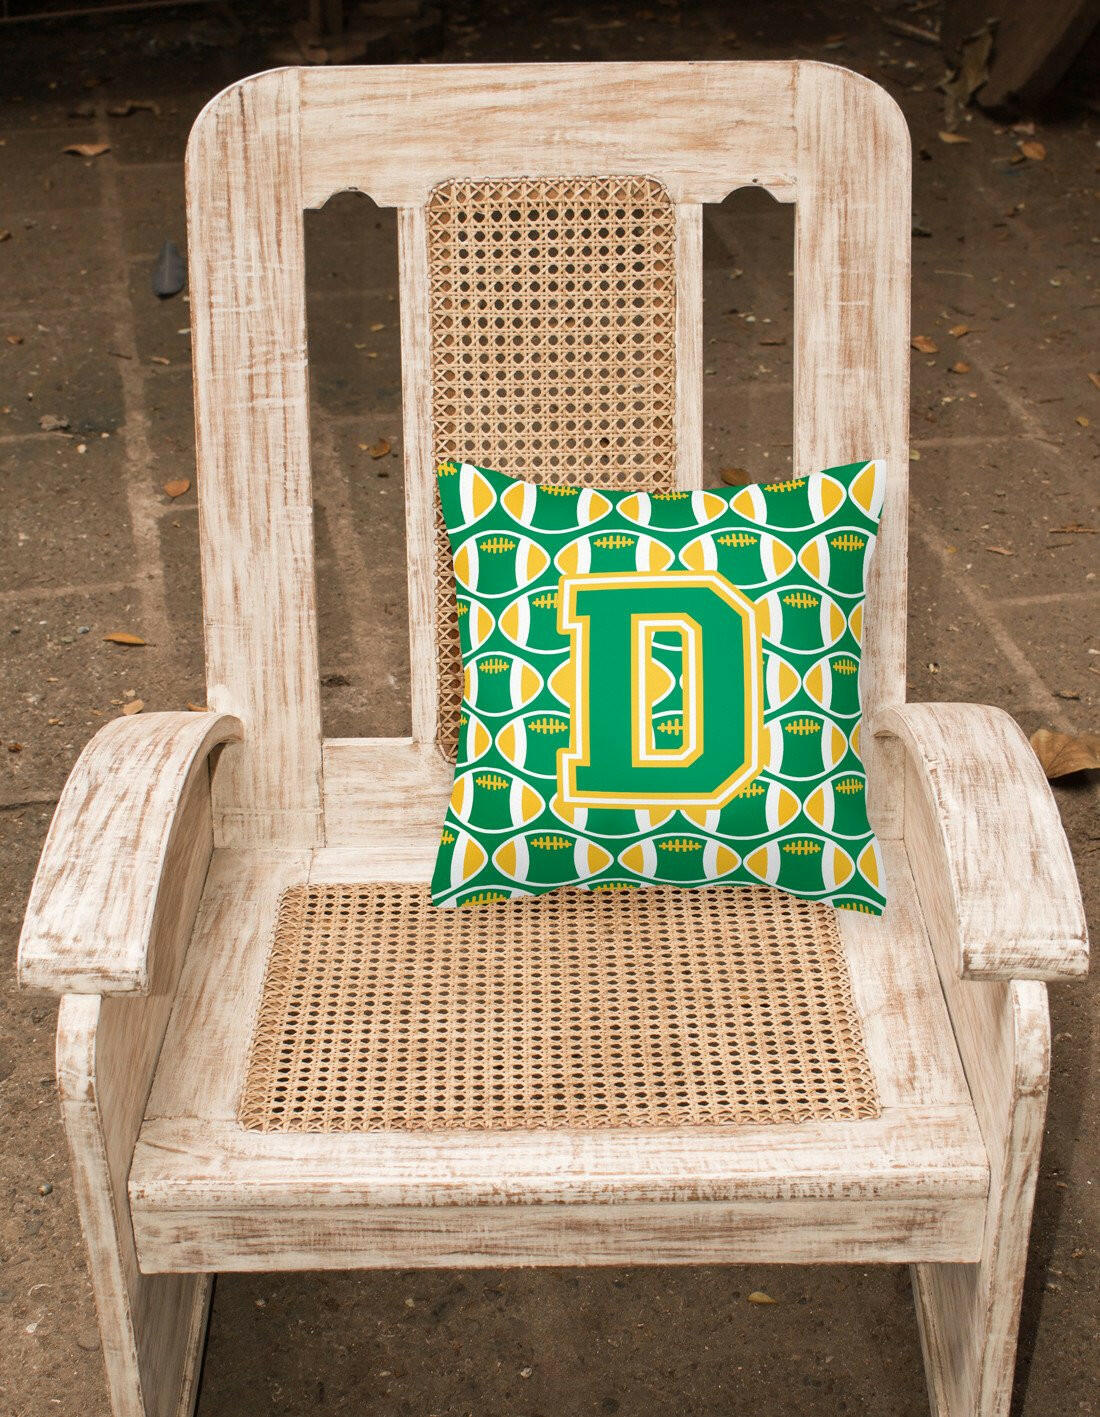 Letter D Football Green and Gold Fabric Decorative Pillow CJ1069-DPW1414 by Caroline's Treasures